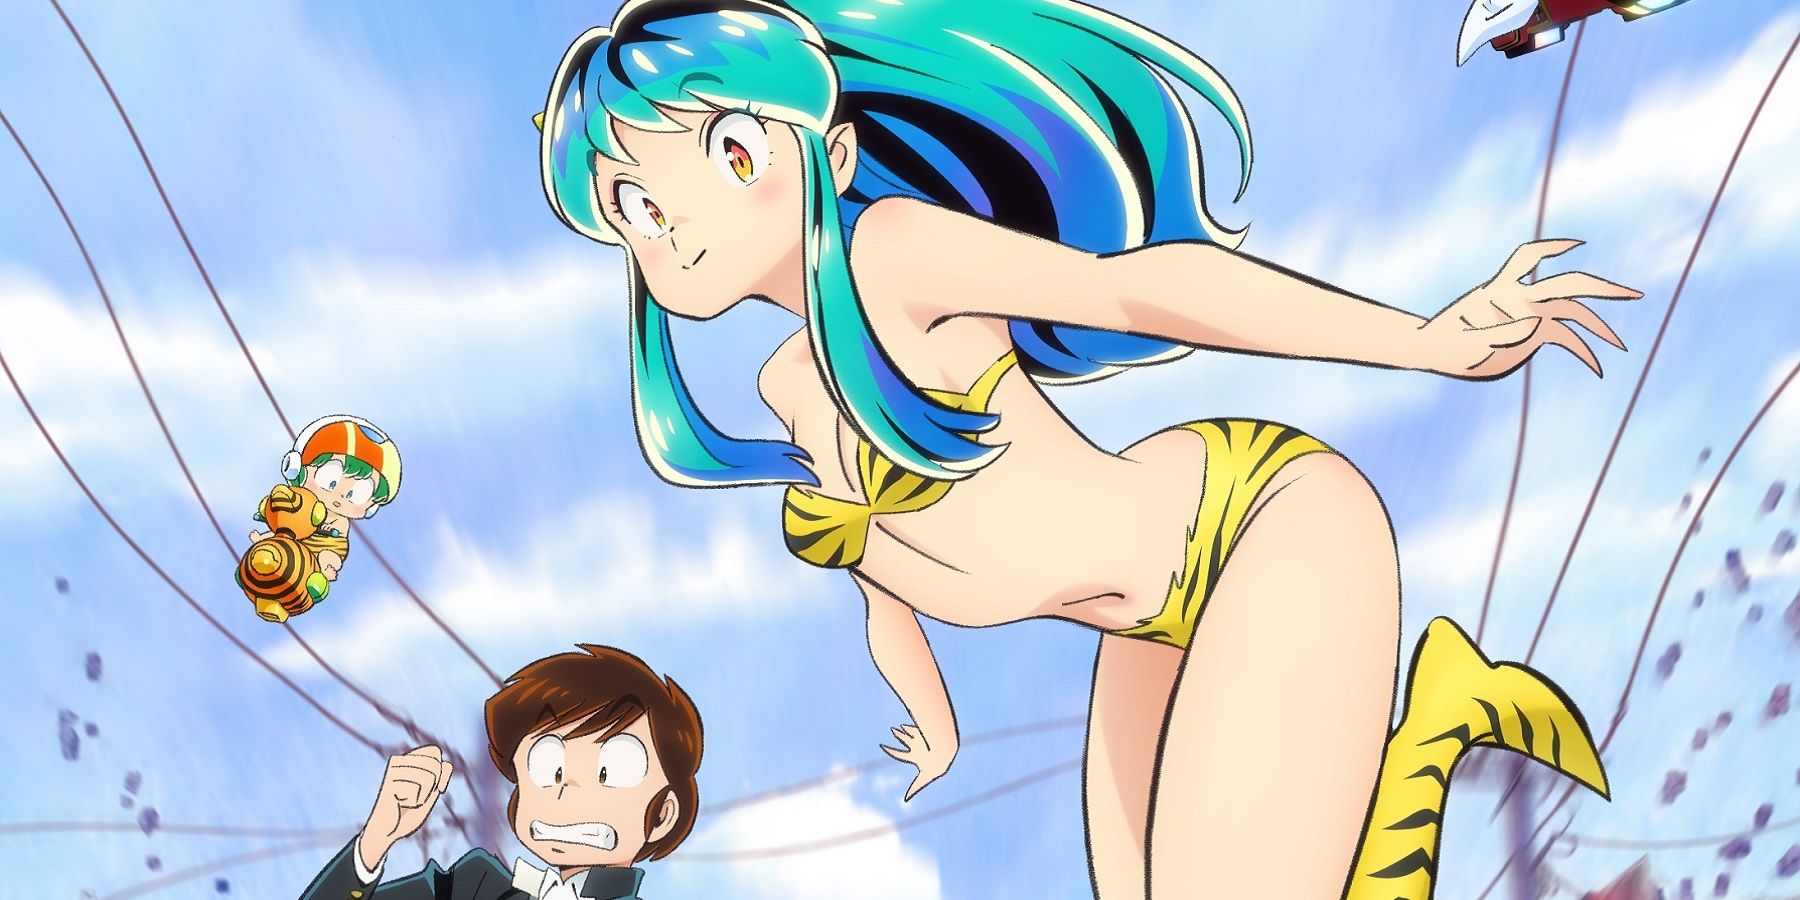 Urusei Yatsura English Dub Confirmed for March 1 Only on HIDIVE